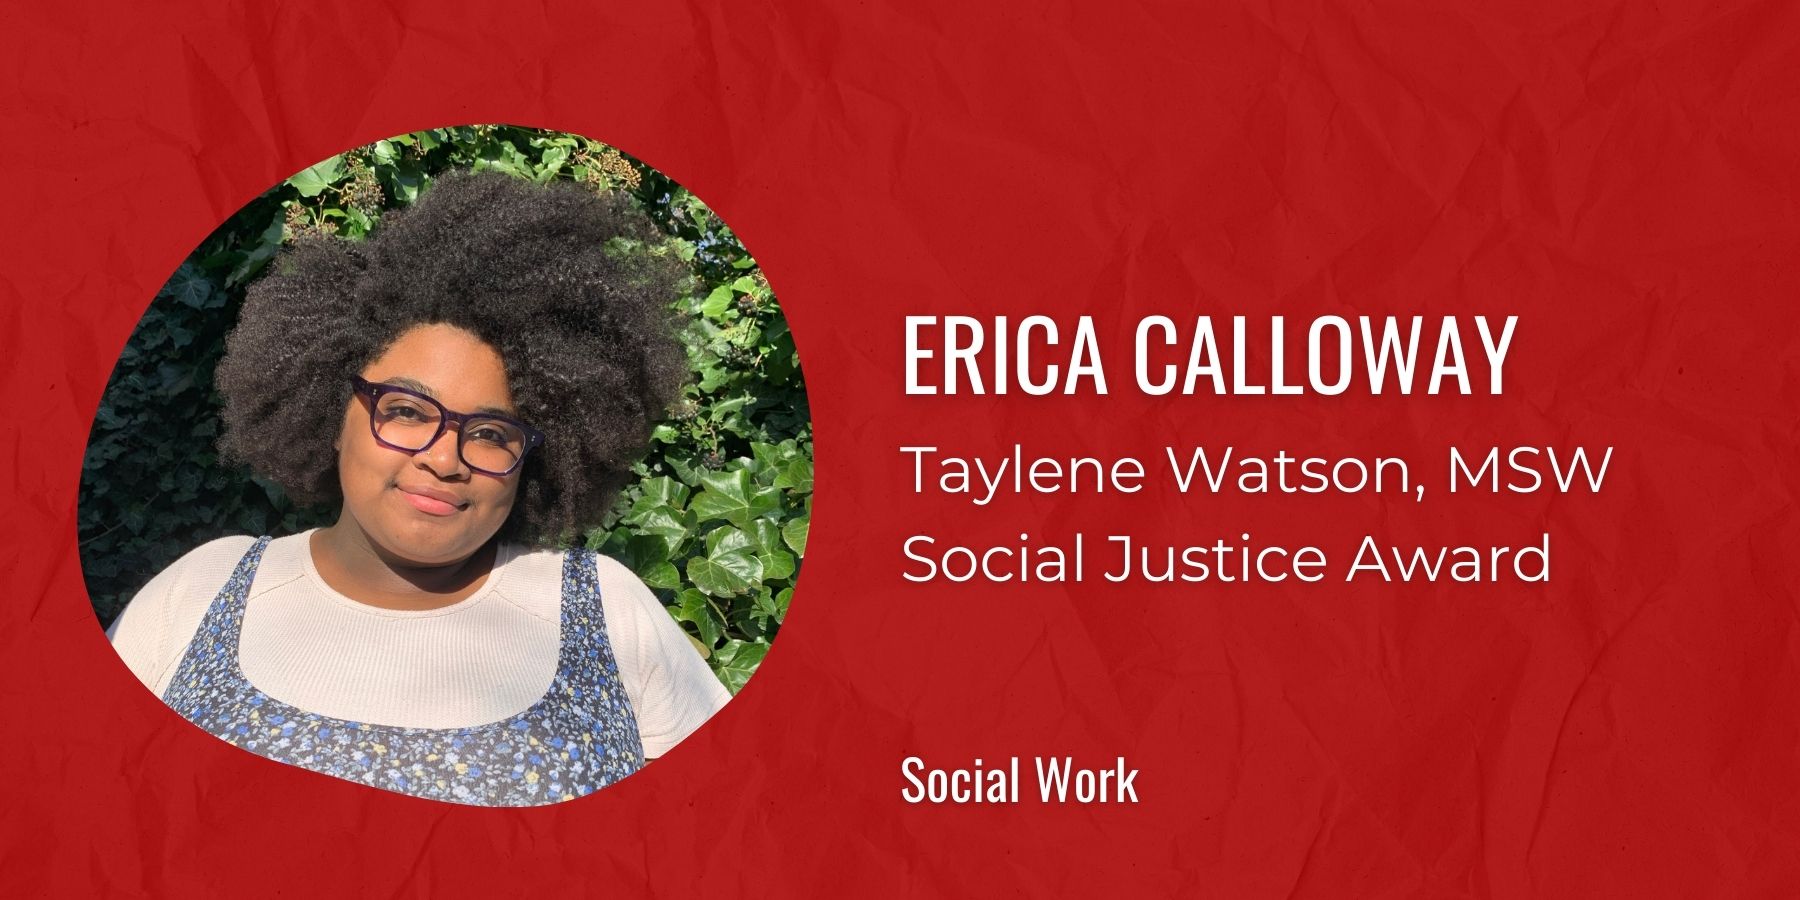 Image of Erica Calloway with text, Taylene Watson, MSW Social Justice Award
